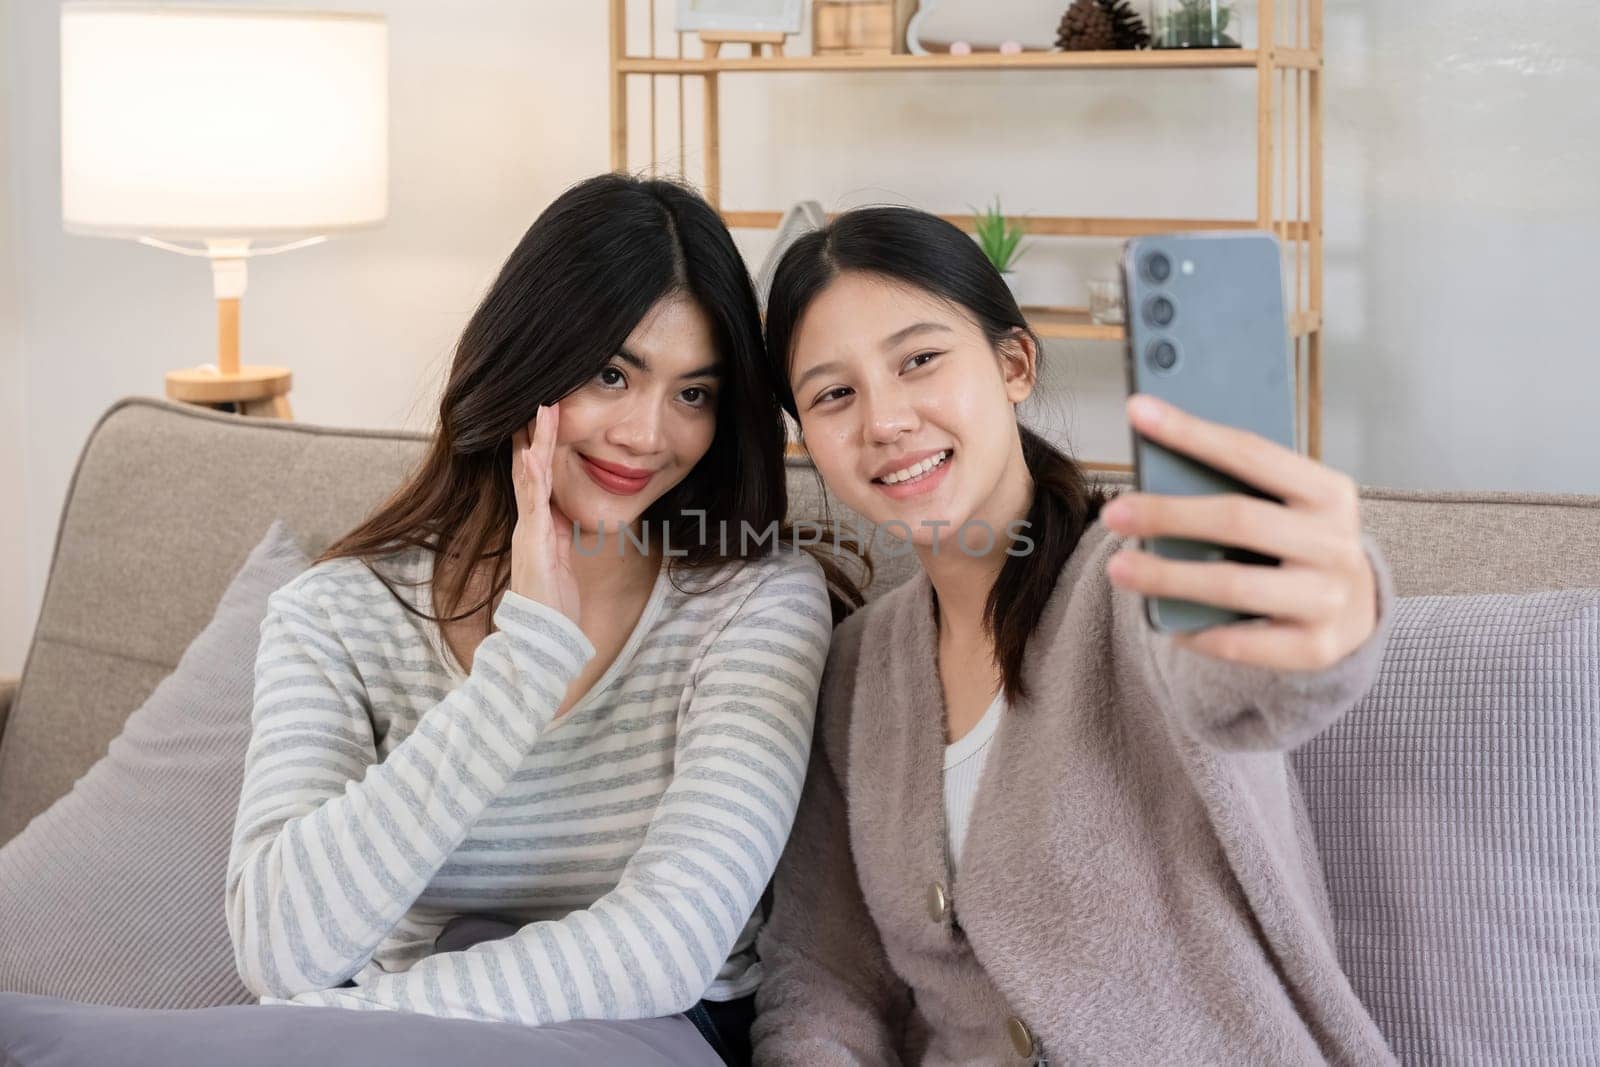 Asian lesbian couple taking a selfie on the sofa at home. Concept of love, togetherness, and capturing happy moments in a cozy indoor setting by wichayada